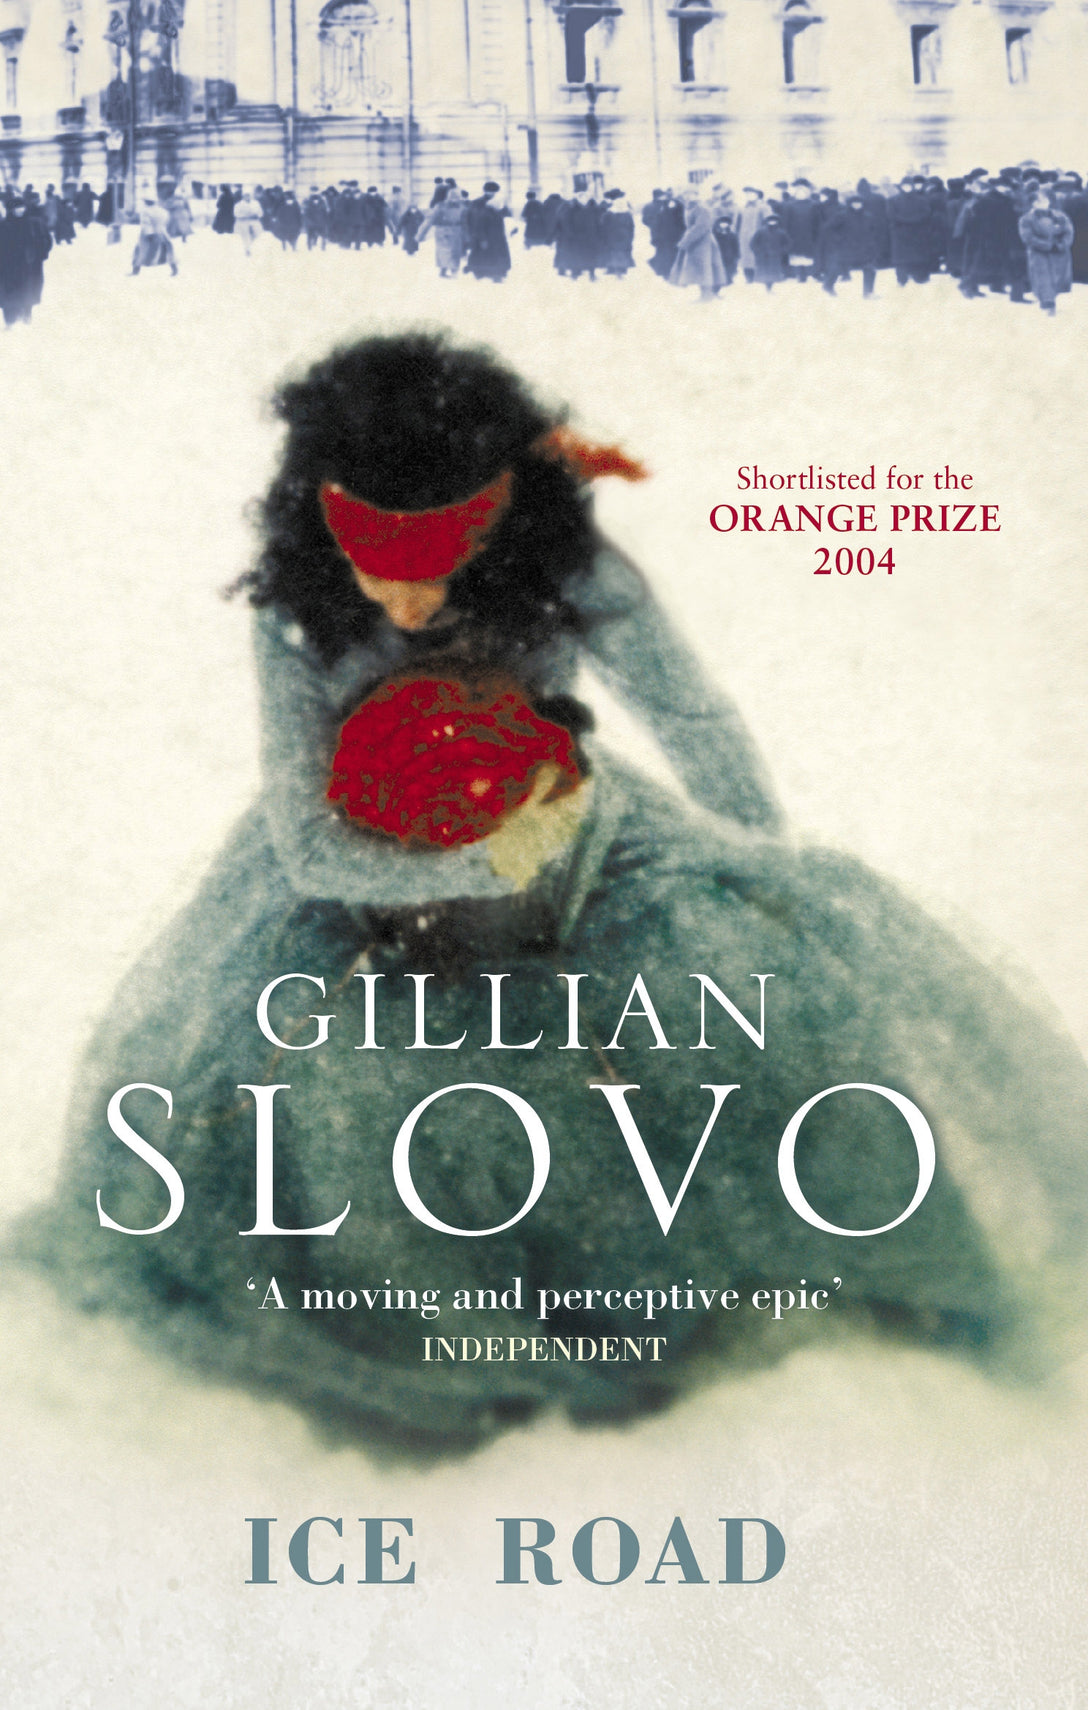 Ice Road by Gillian Slovo